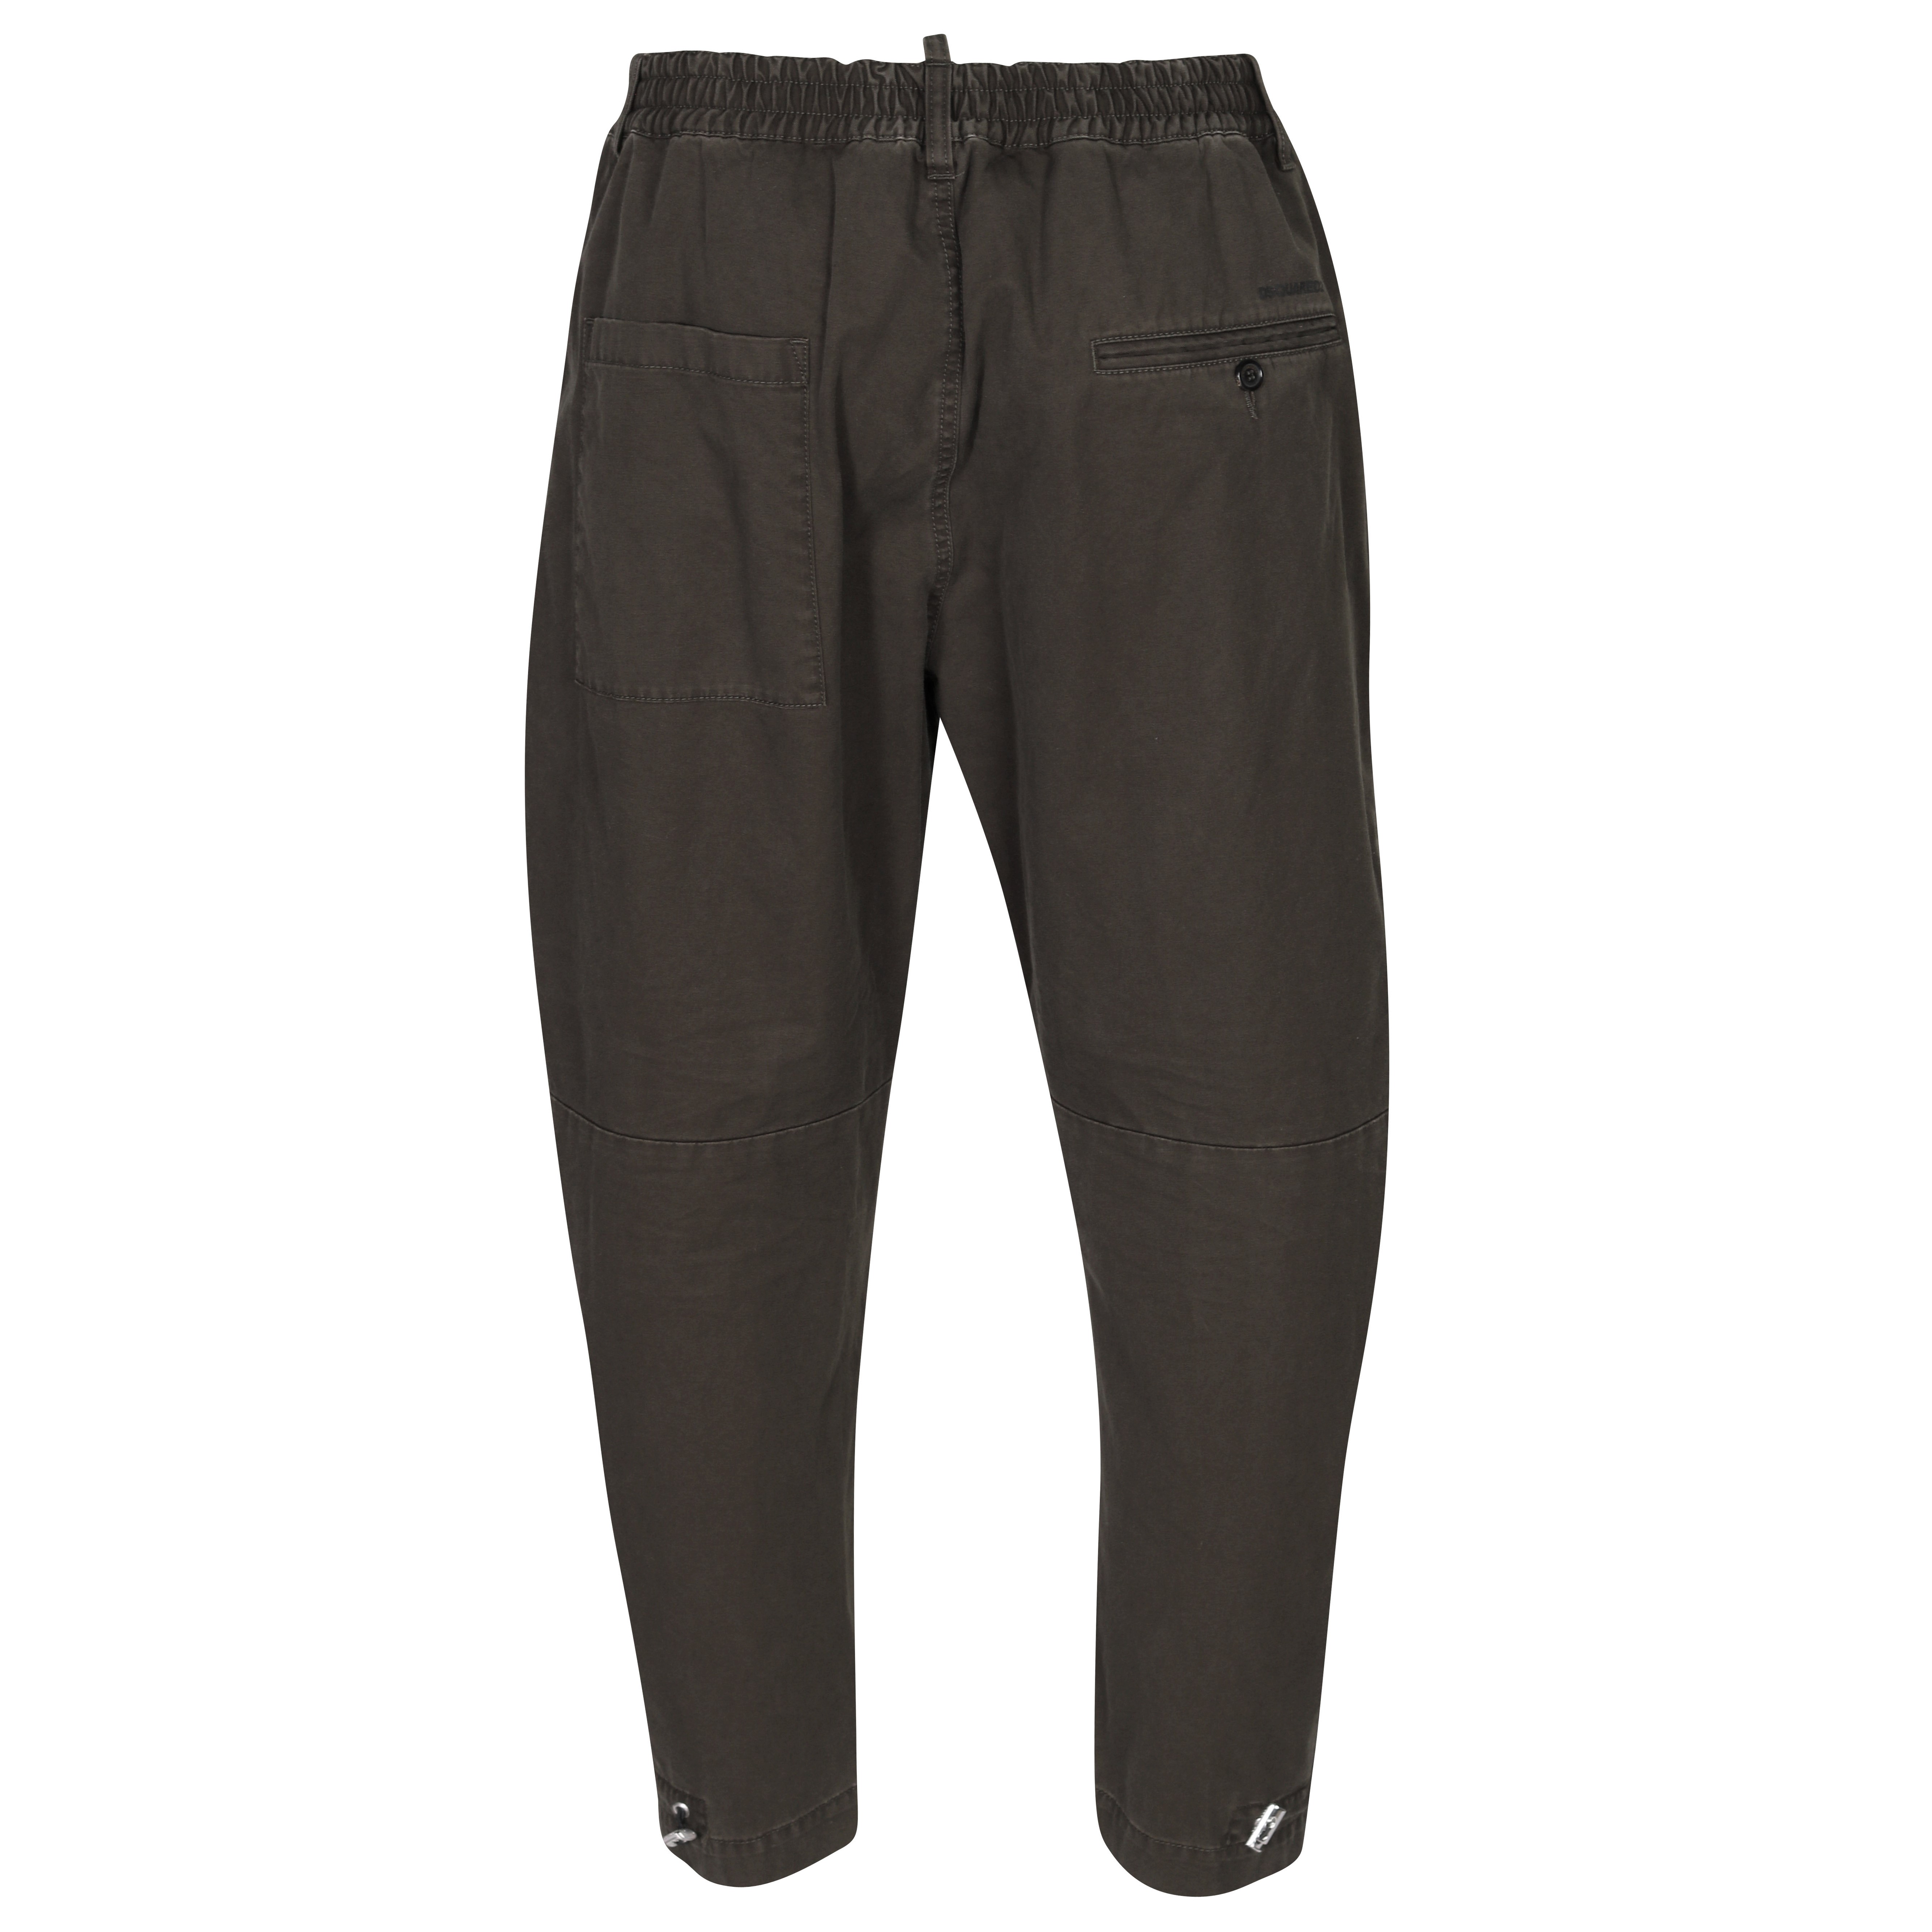 Dsquared Pully Pant in Dark Olive 46